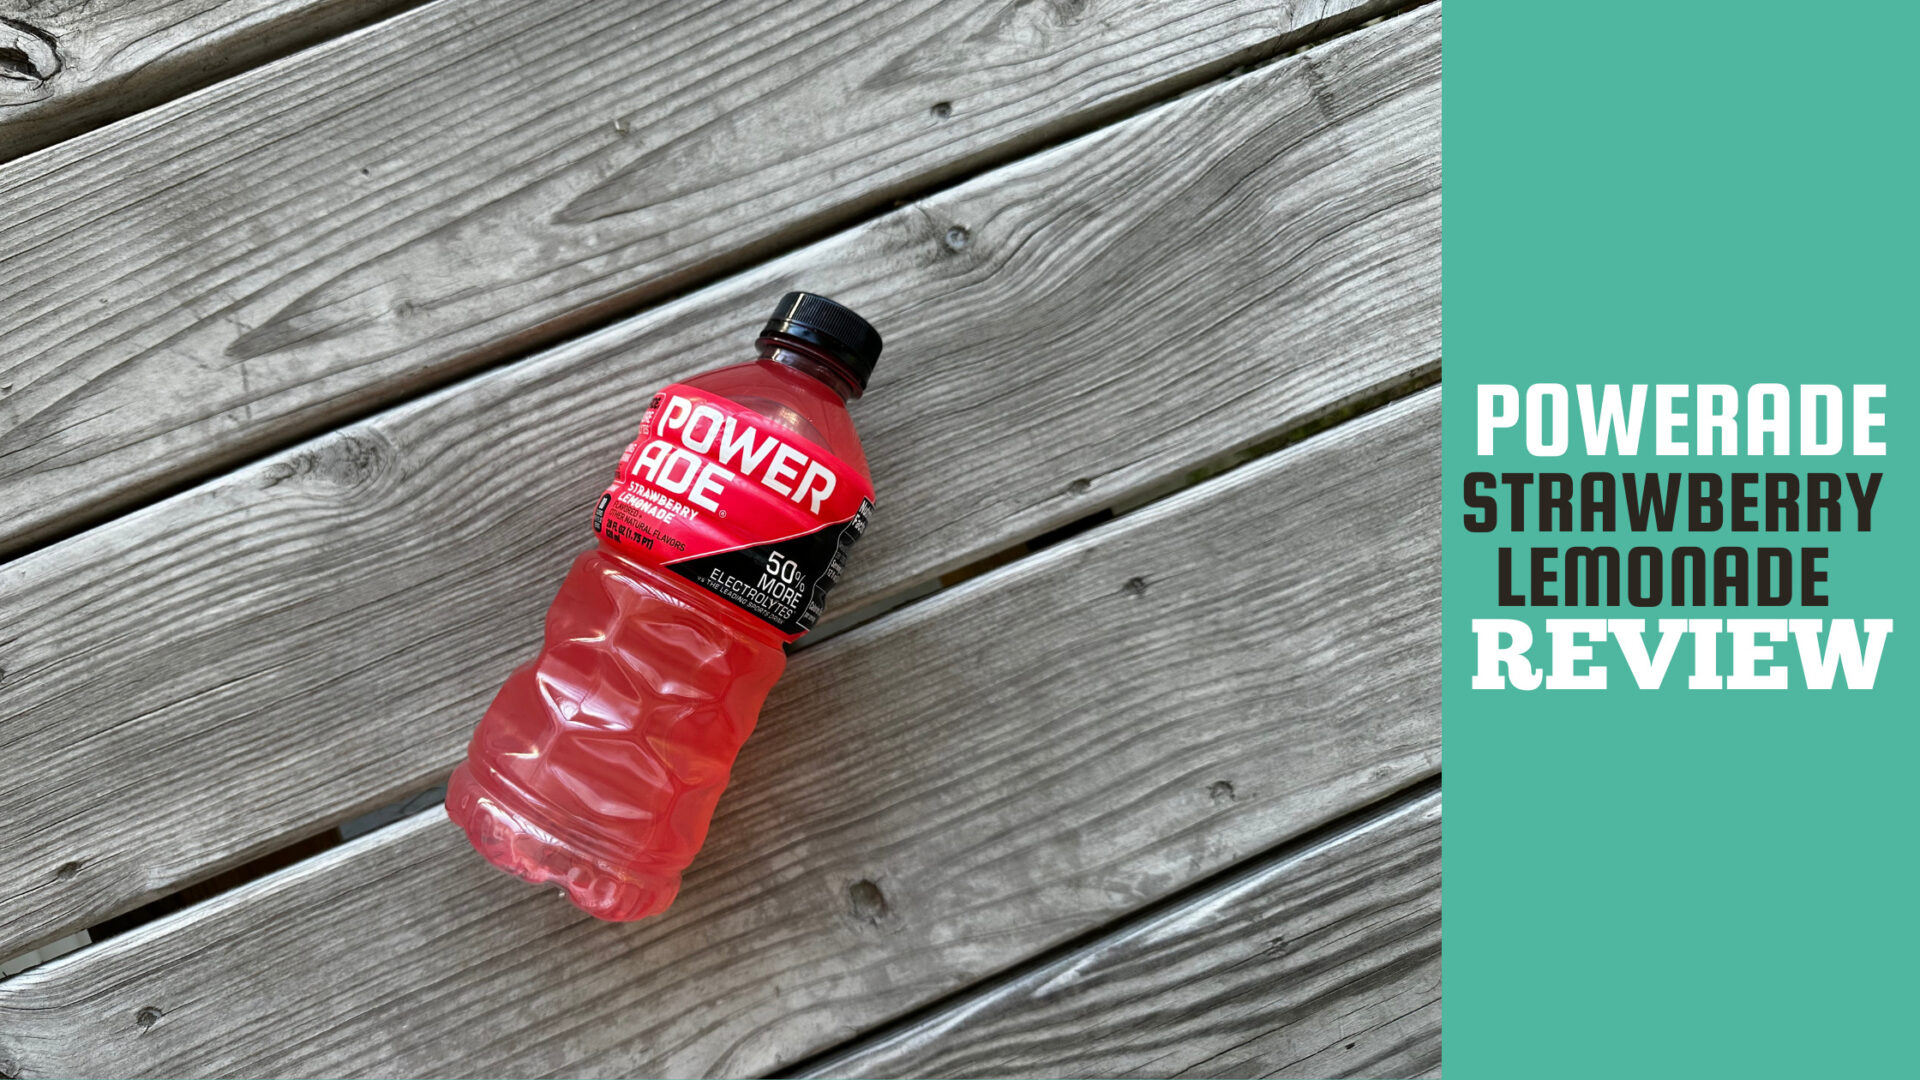 Featured image for the post, "Powerade Strawberry Lemonade Review: A Refreshing Twist of Flavor"